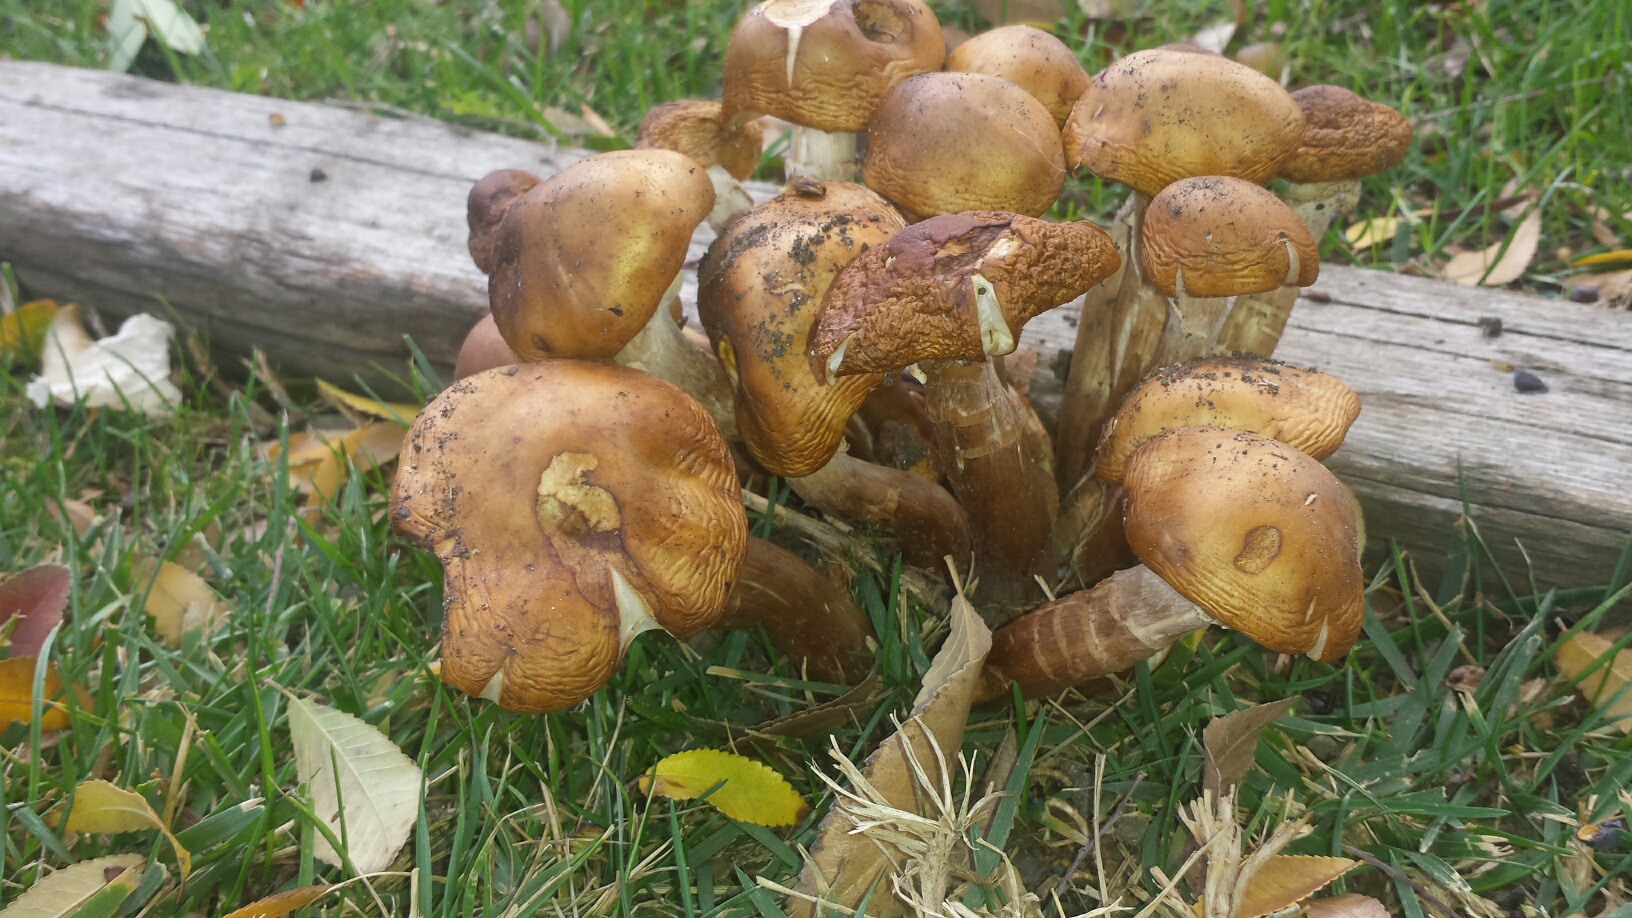 mushrooms are common in outdoor environments around our home